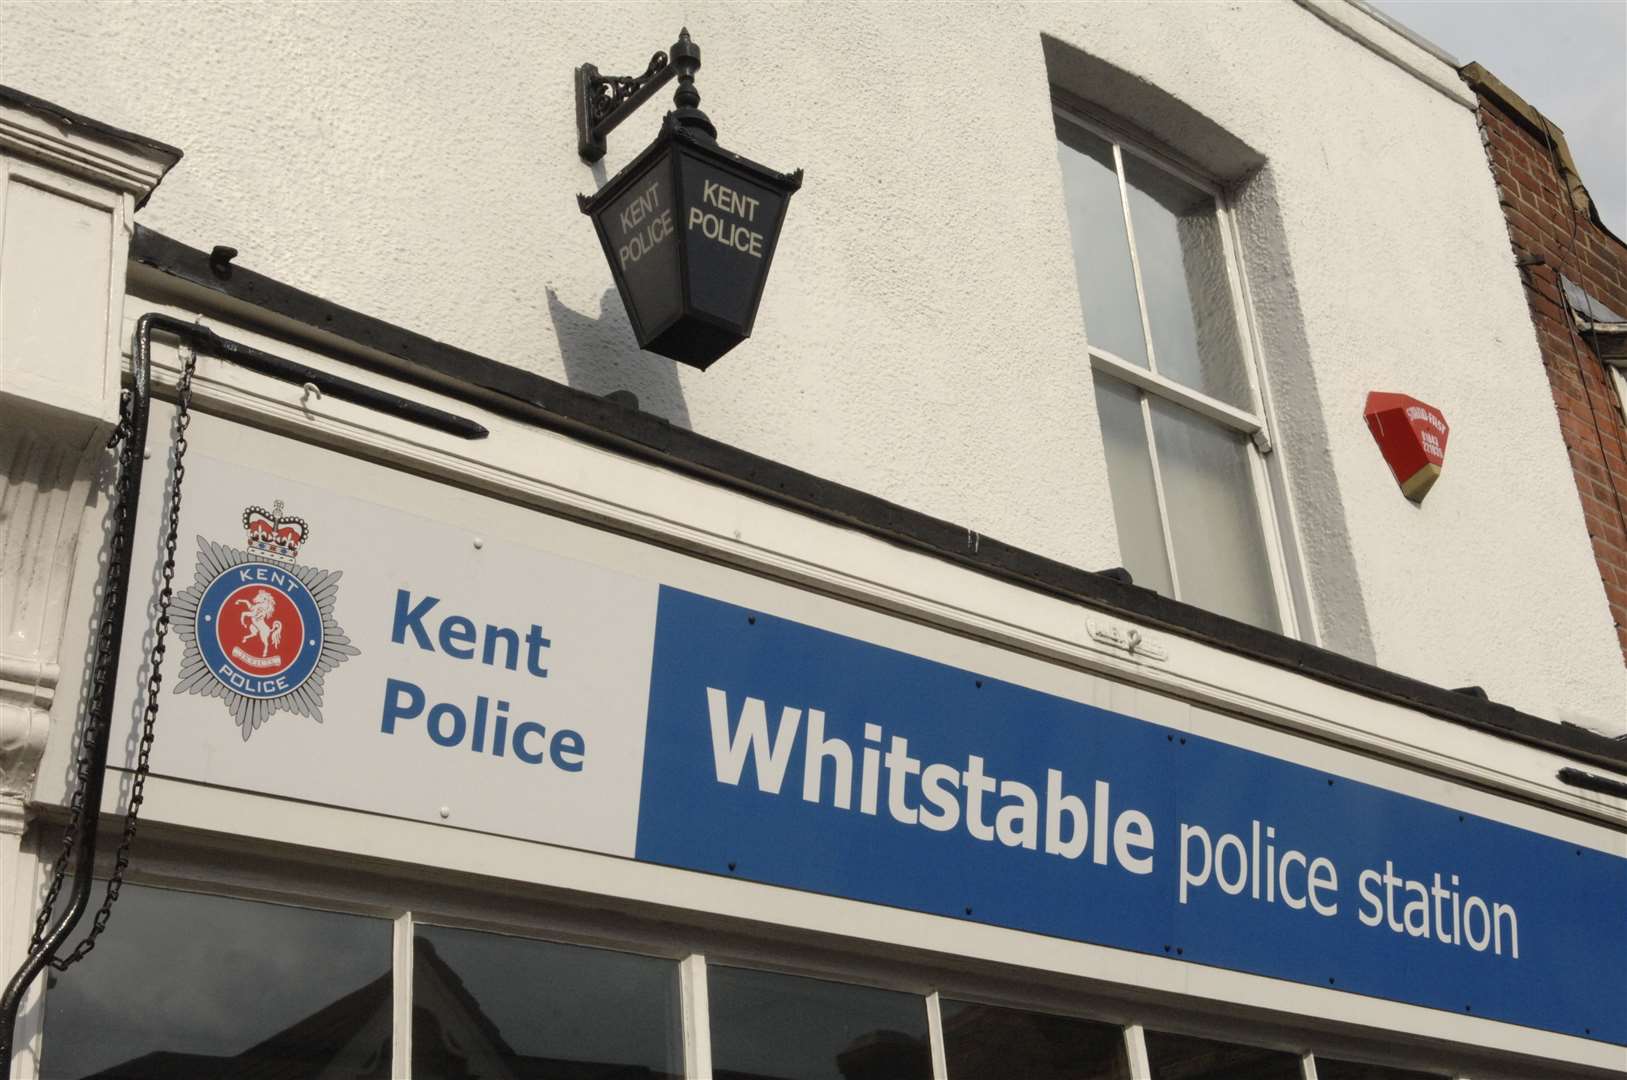 The Whitstable Police Station in Oxford Street, pictured before its closure in 2012